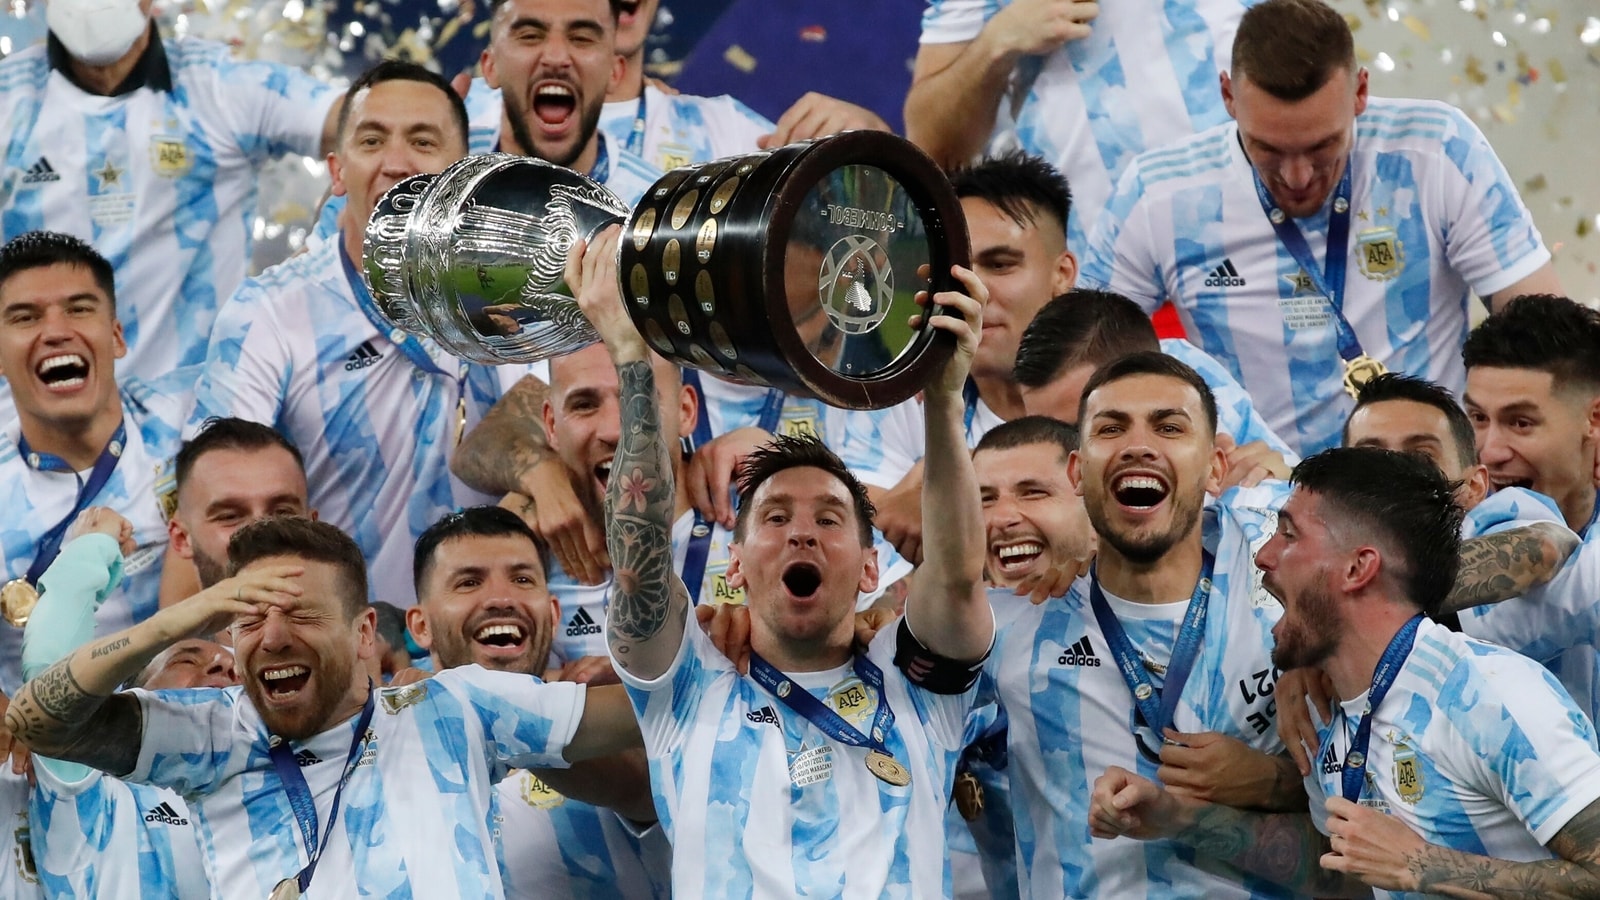 Download Lionel Messi holding the Copa America medal 2021 Wallpaper   Wallpaperscom